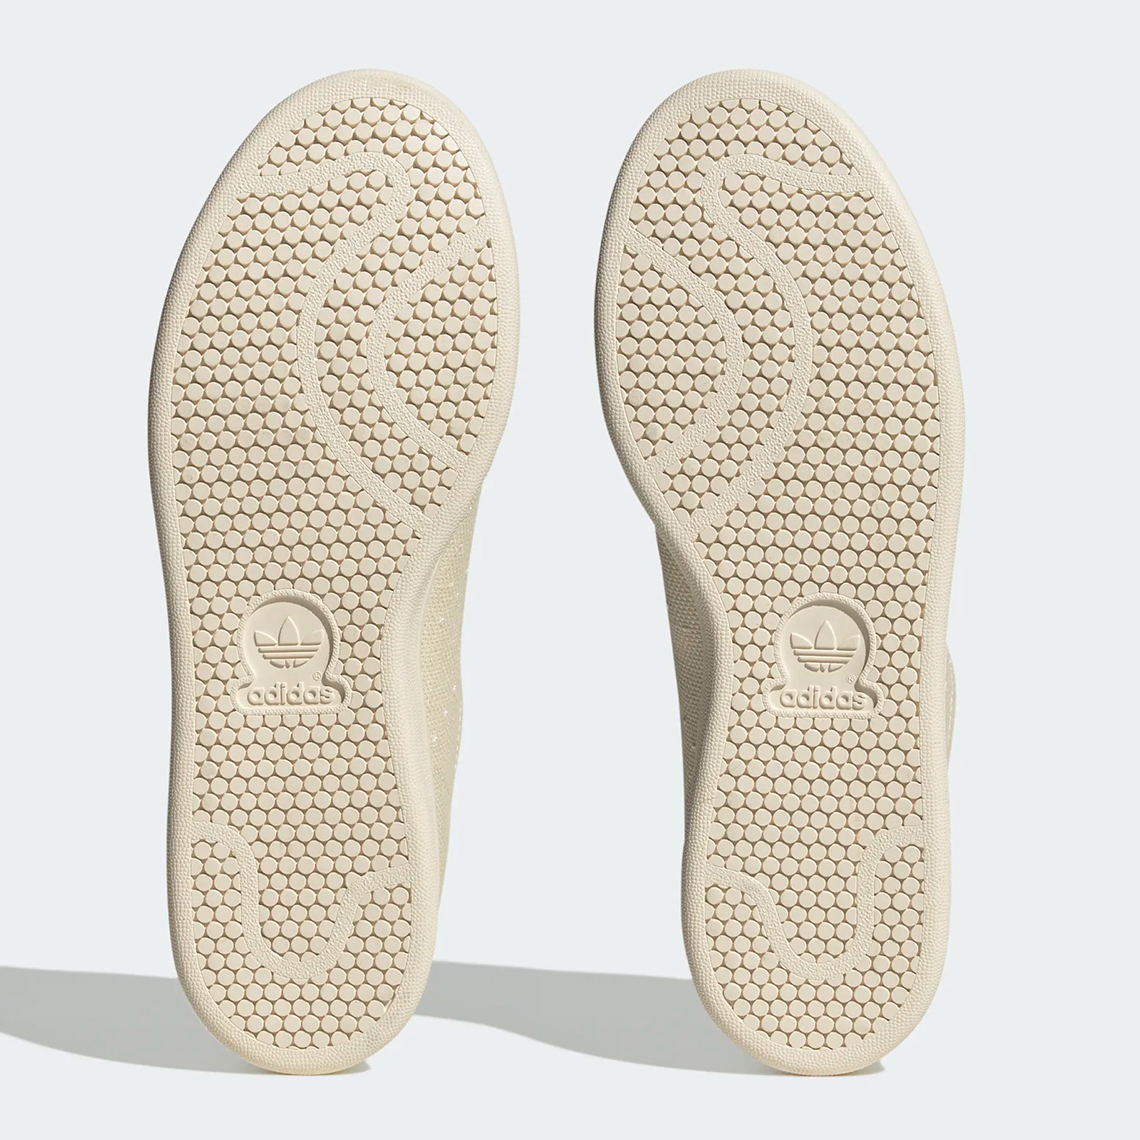 adidas Earth Day 2023 Release Date | adidas removable insoles for ...